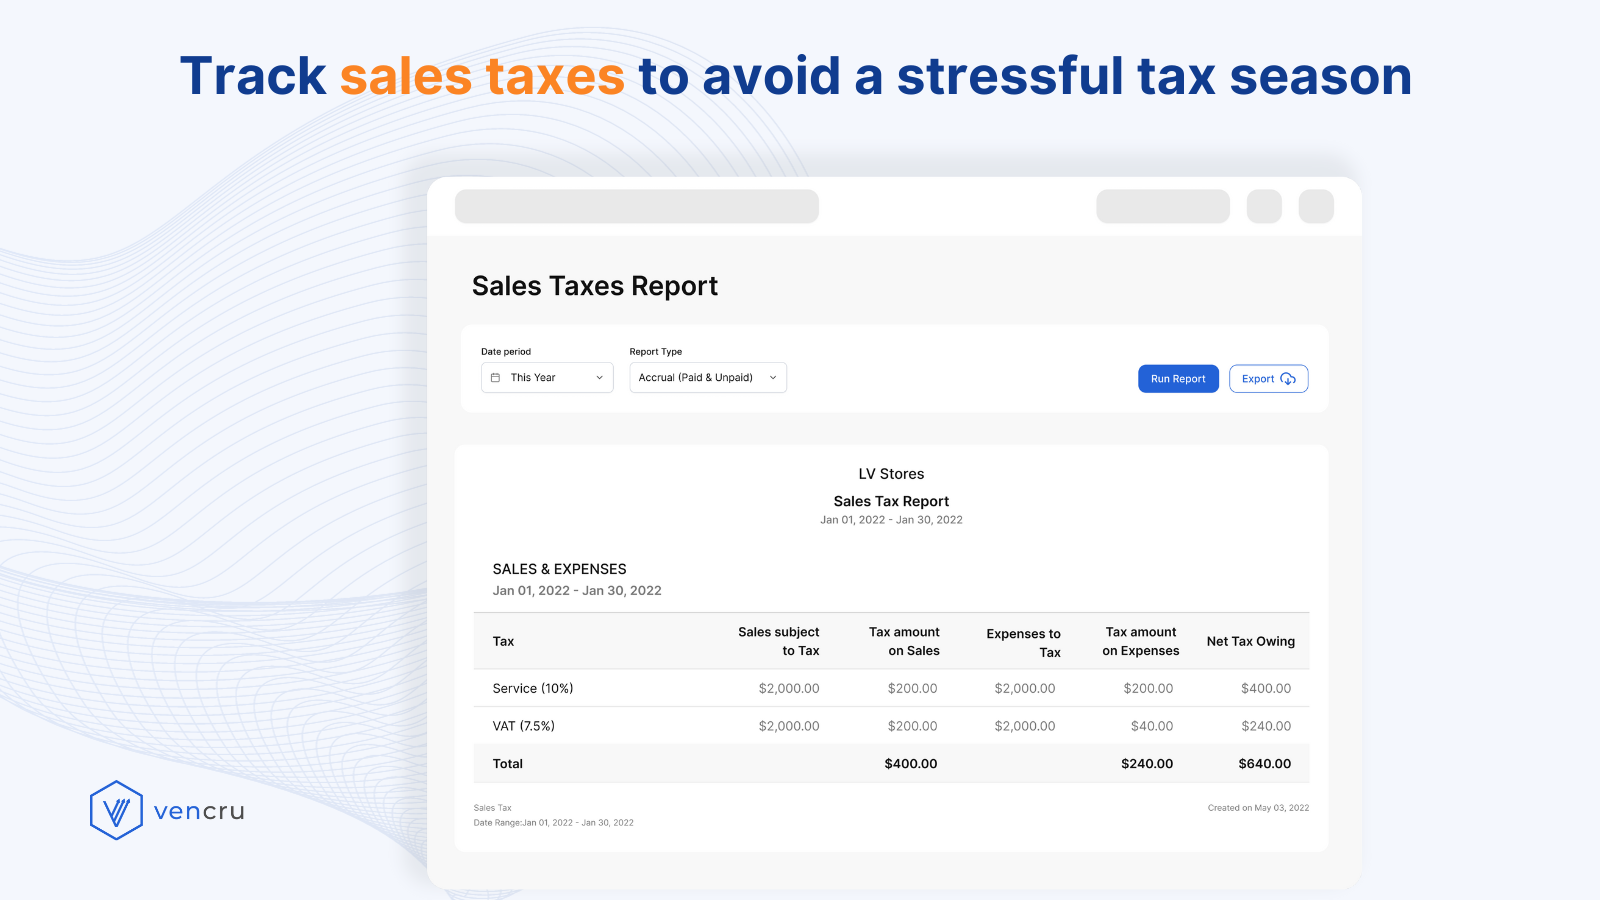 Track sale﻿s taxes to avoid a stressful tax season